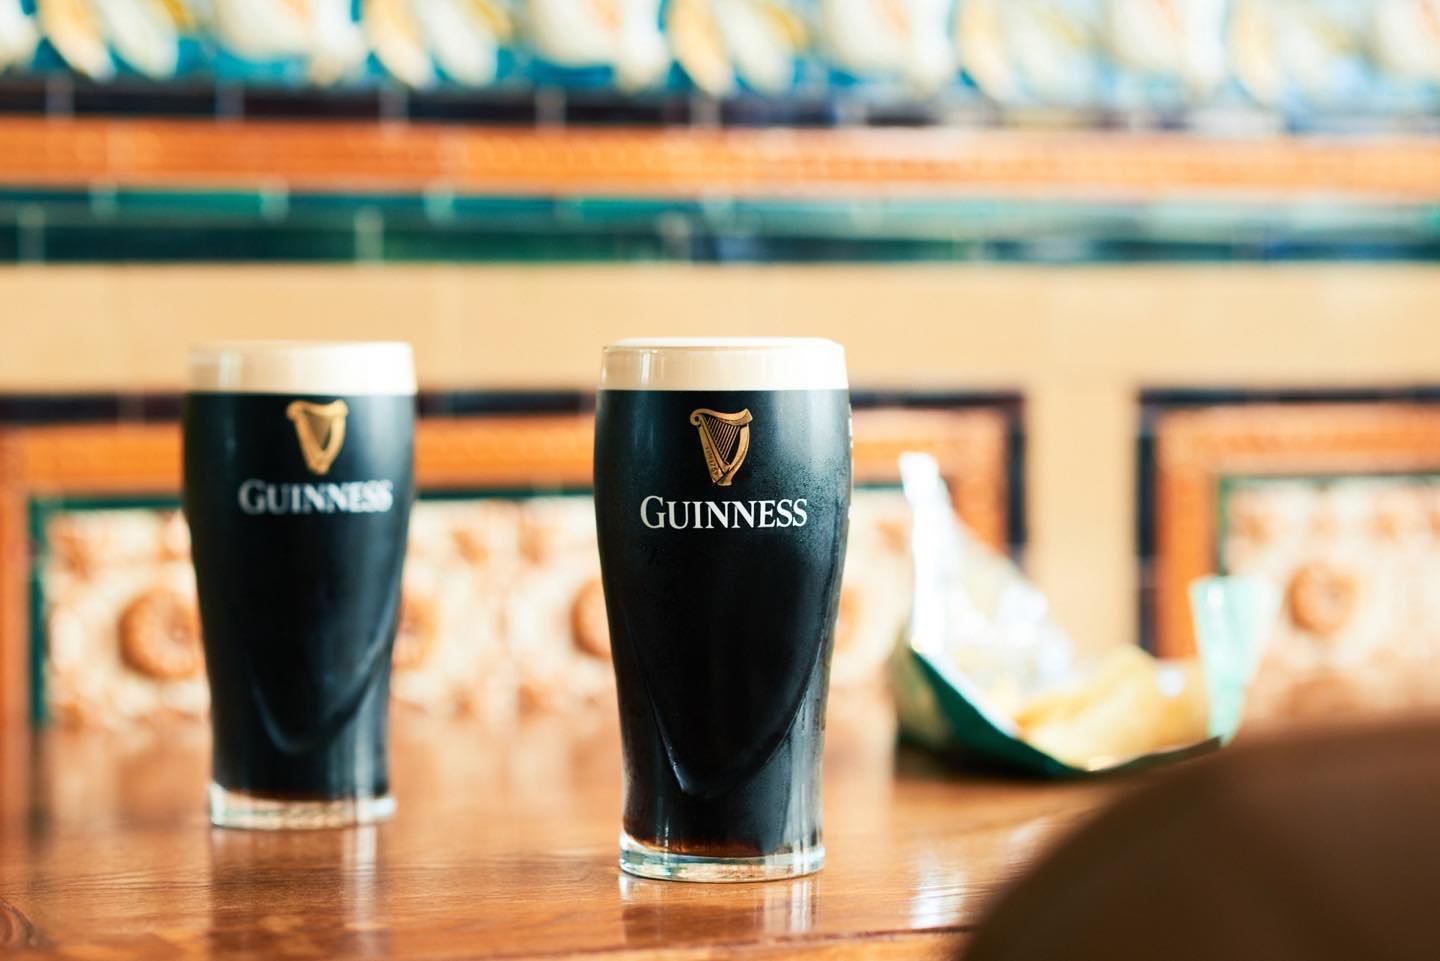 We only serve the highest quality, best poured, finest Guinness in Peckham. 

Guinness &pound;5.60
Students &pound;5.00
Mon-Fri (3pm-5pm) &pound;4.00

Swing on over, let&rsquo;s do this Saturday!

Photography by @_rye_smile #peckhampubs #timeout #pec